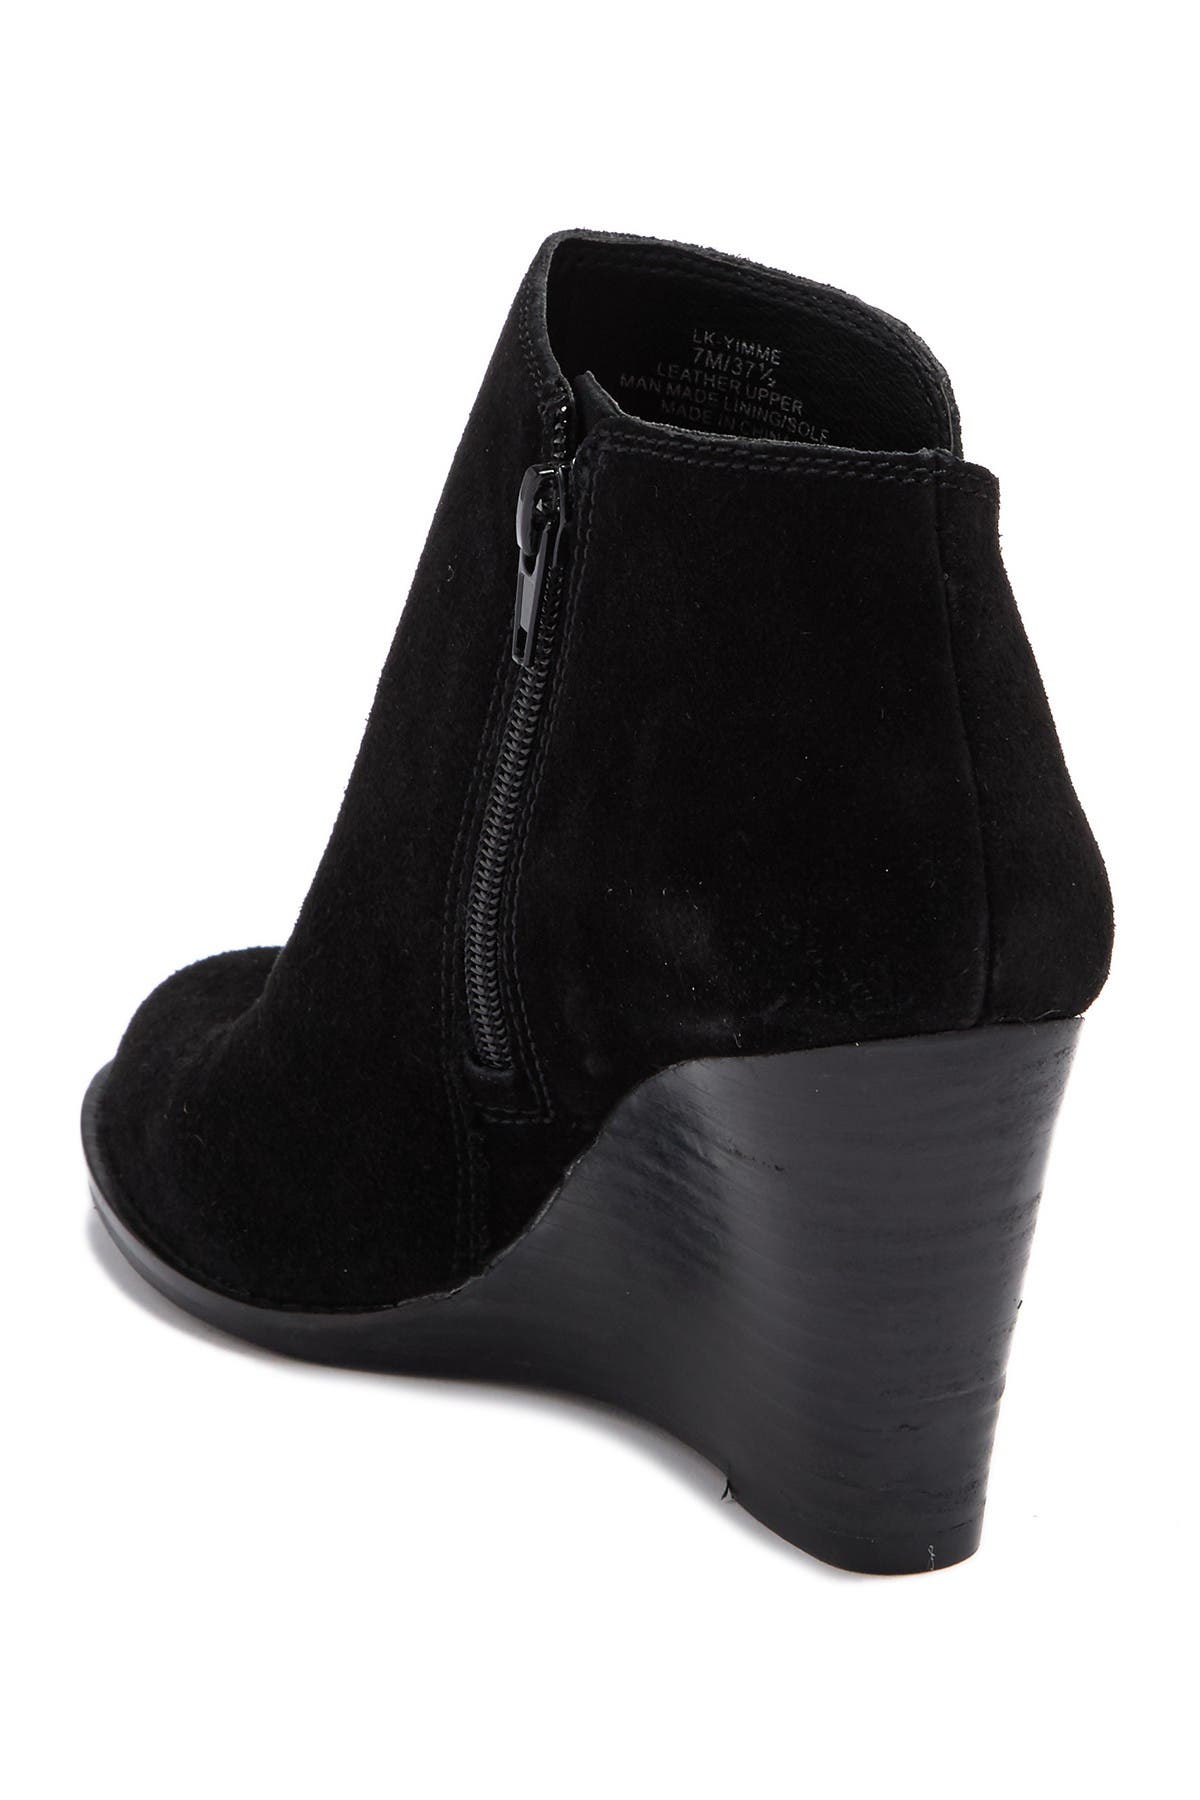 lucky brand yimme bootie